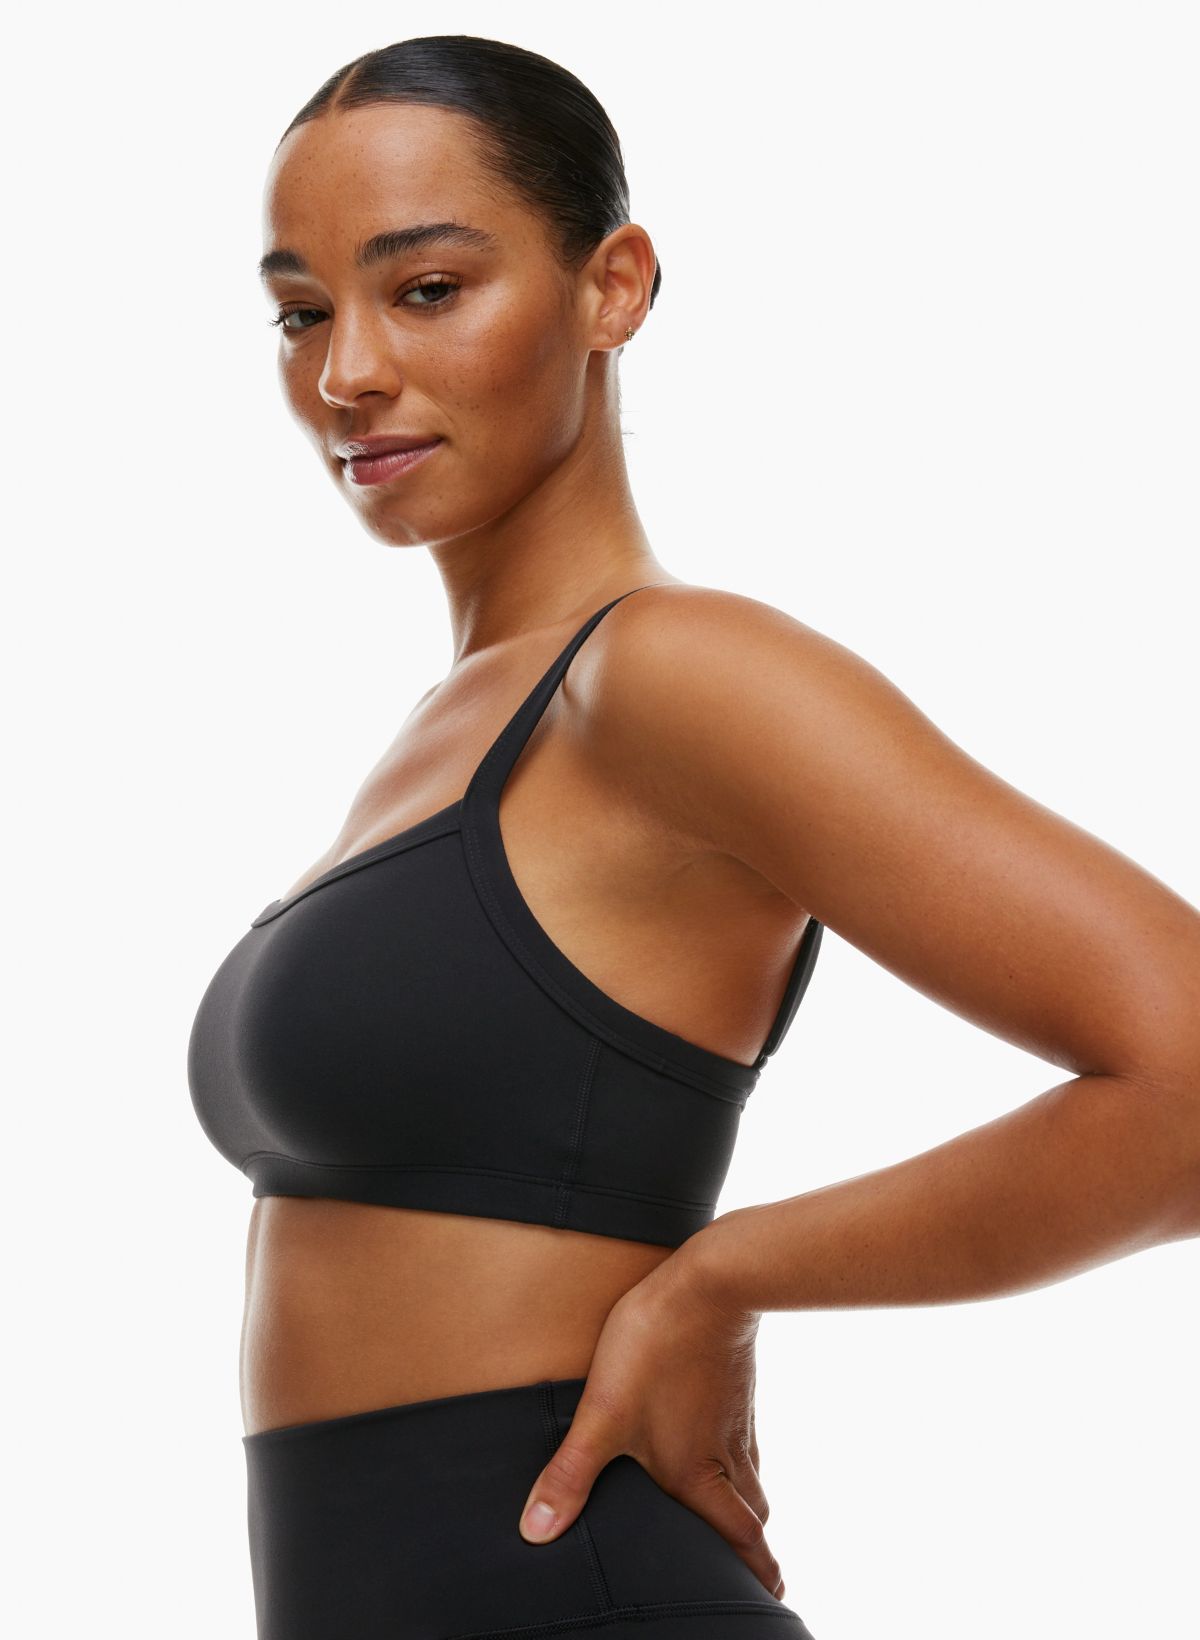 Sports Bra Fitting Essentials – Part 2: The Band - Sports Bras Direct